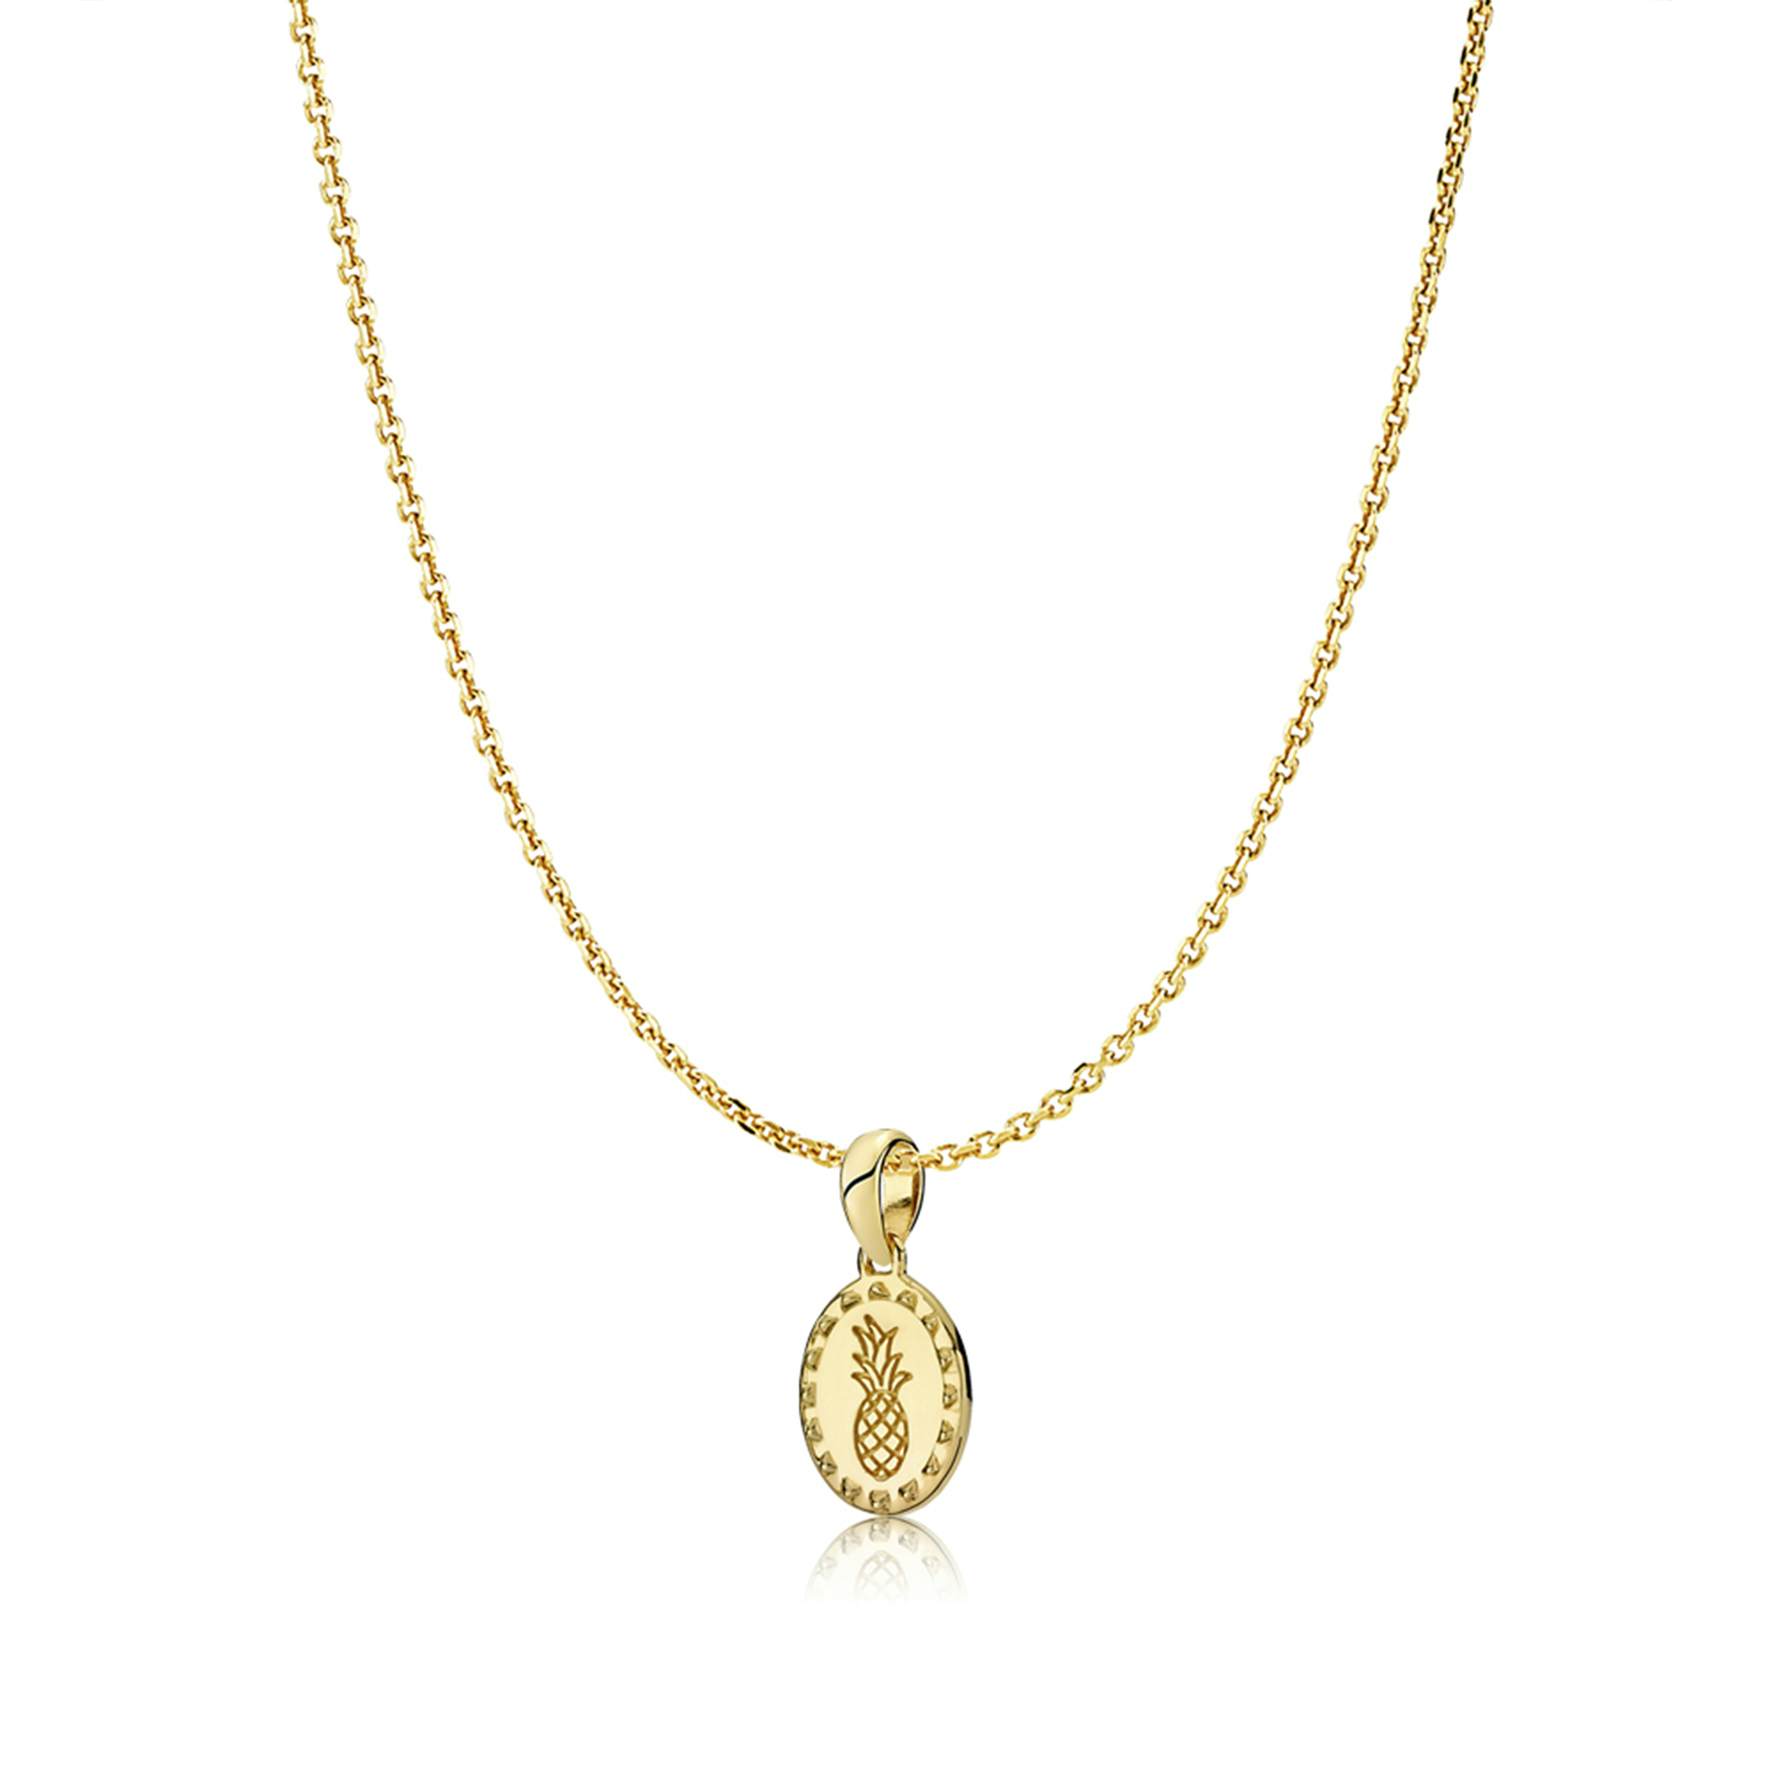 Anna By Sistie Round Pendant Necklace from Sistie in Goldplated-Silver Sterling 925